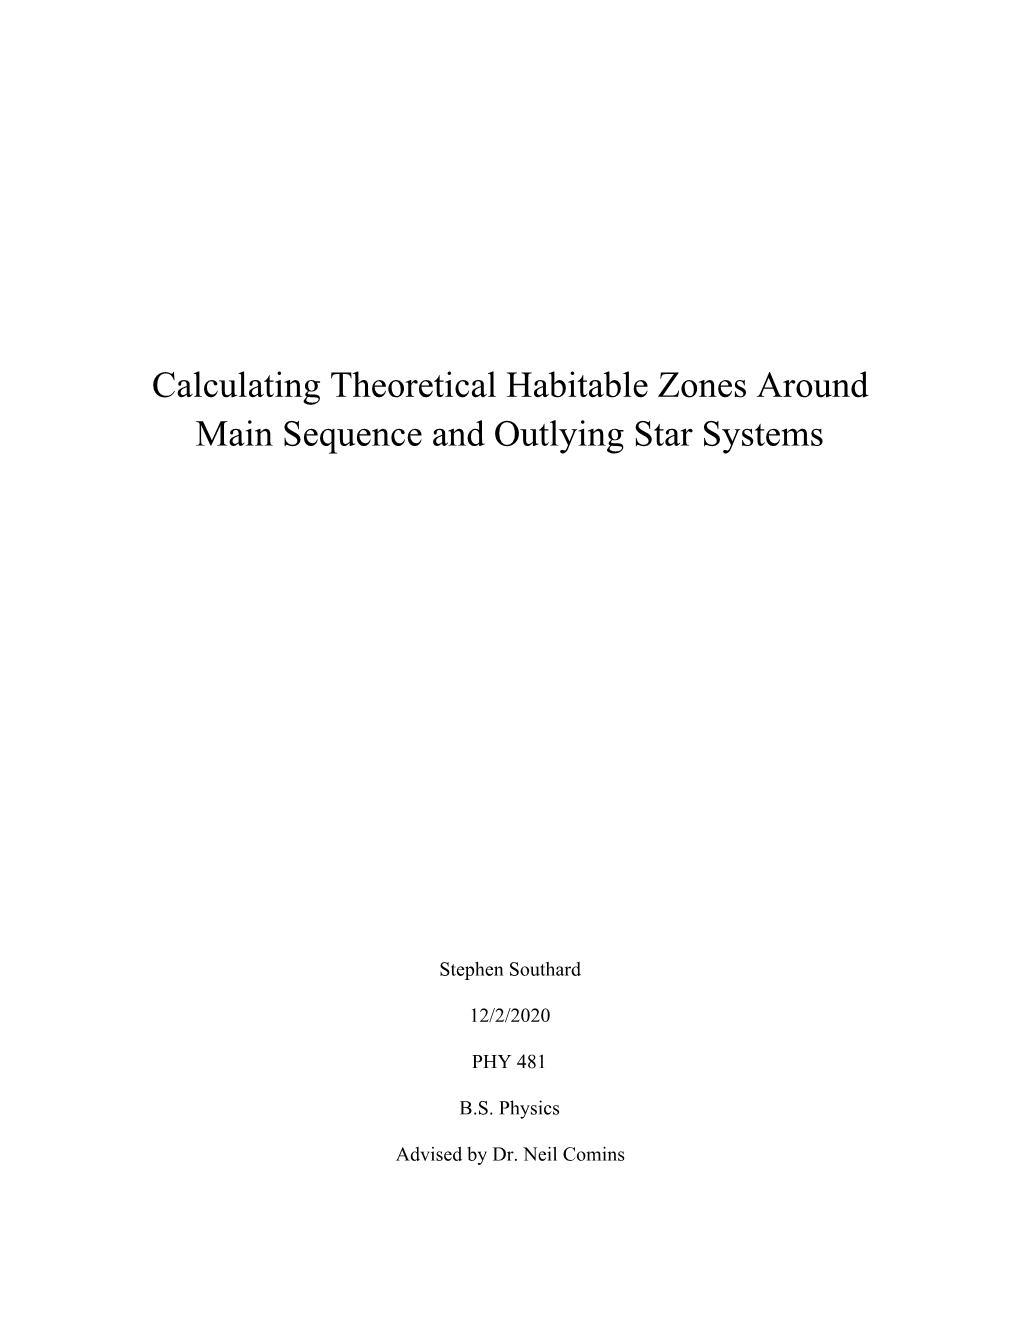 Calculating Theoretical Habitable Zones Around Main Sequence and Outlying Star Systems